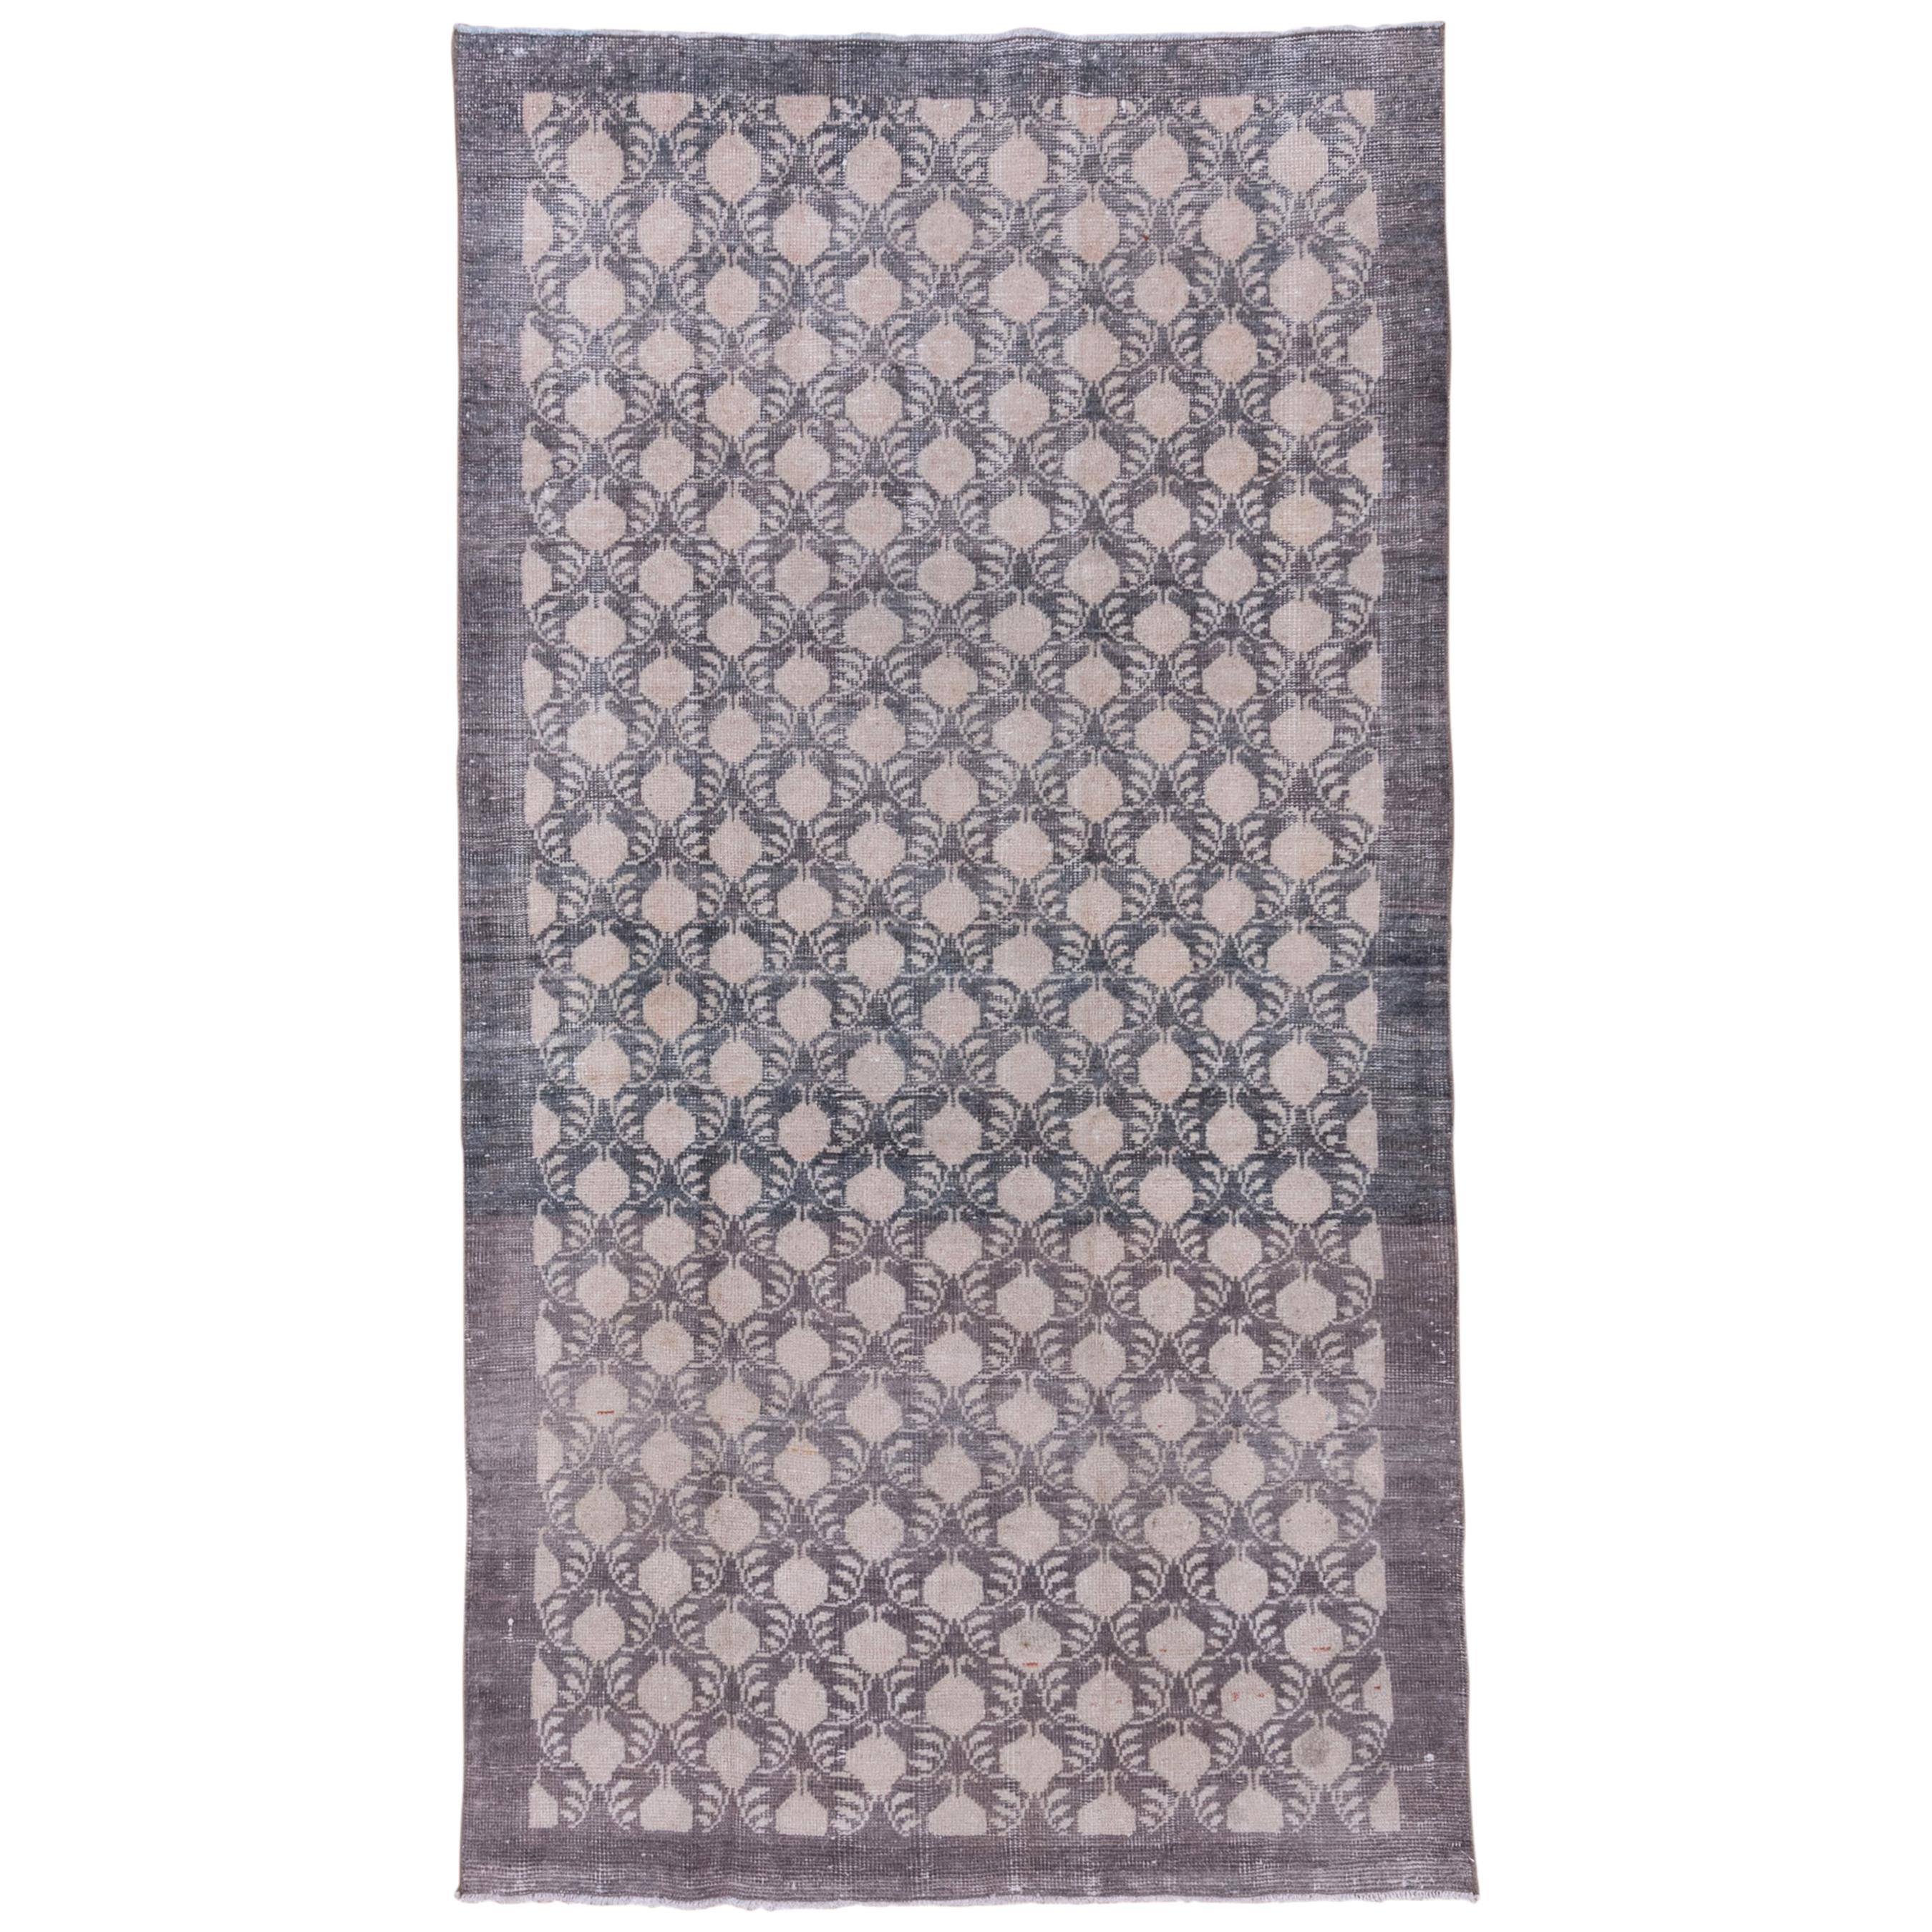 Gray and White Turkish Oushak Rug, All-Over Design, Shabby Chic Style